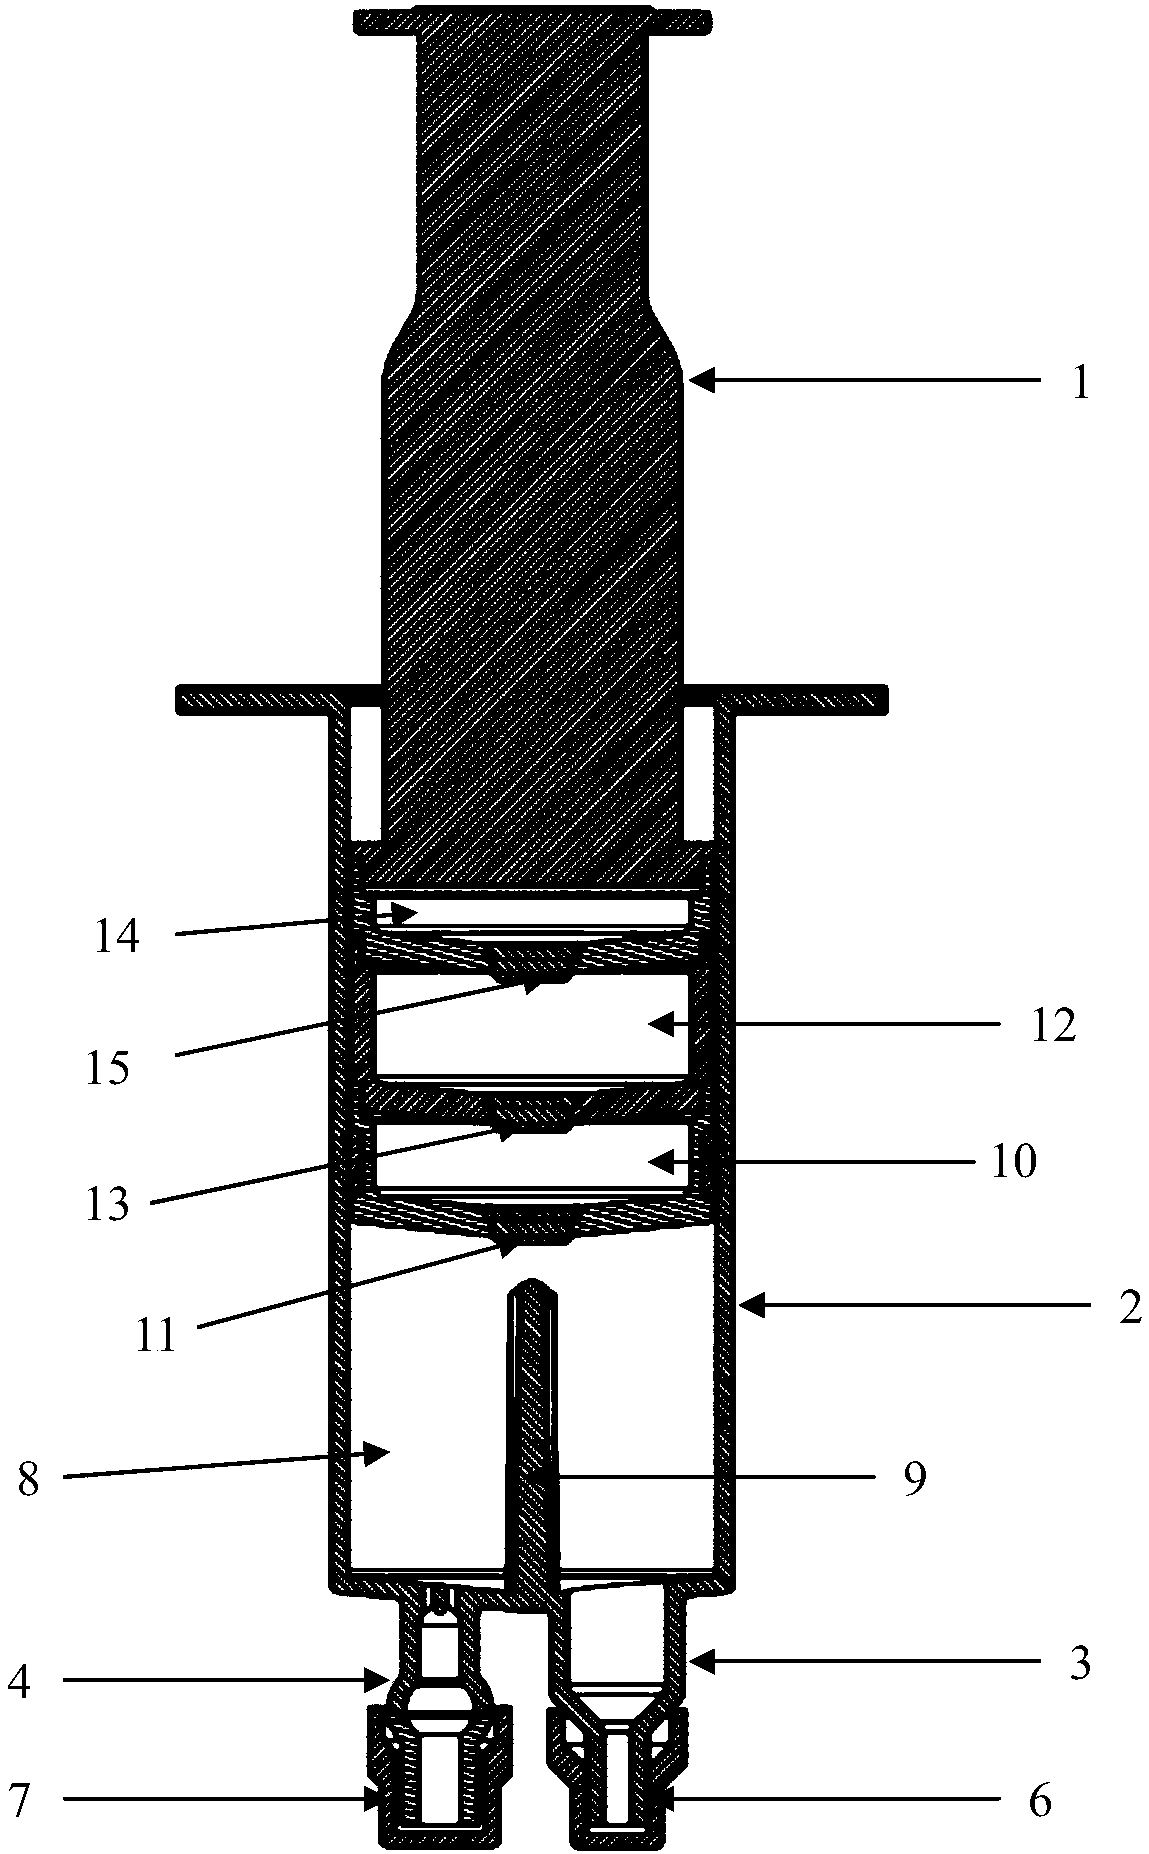 Quick nucleic acid extracting device